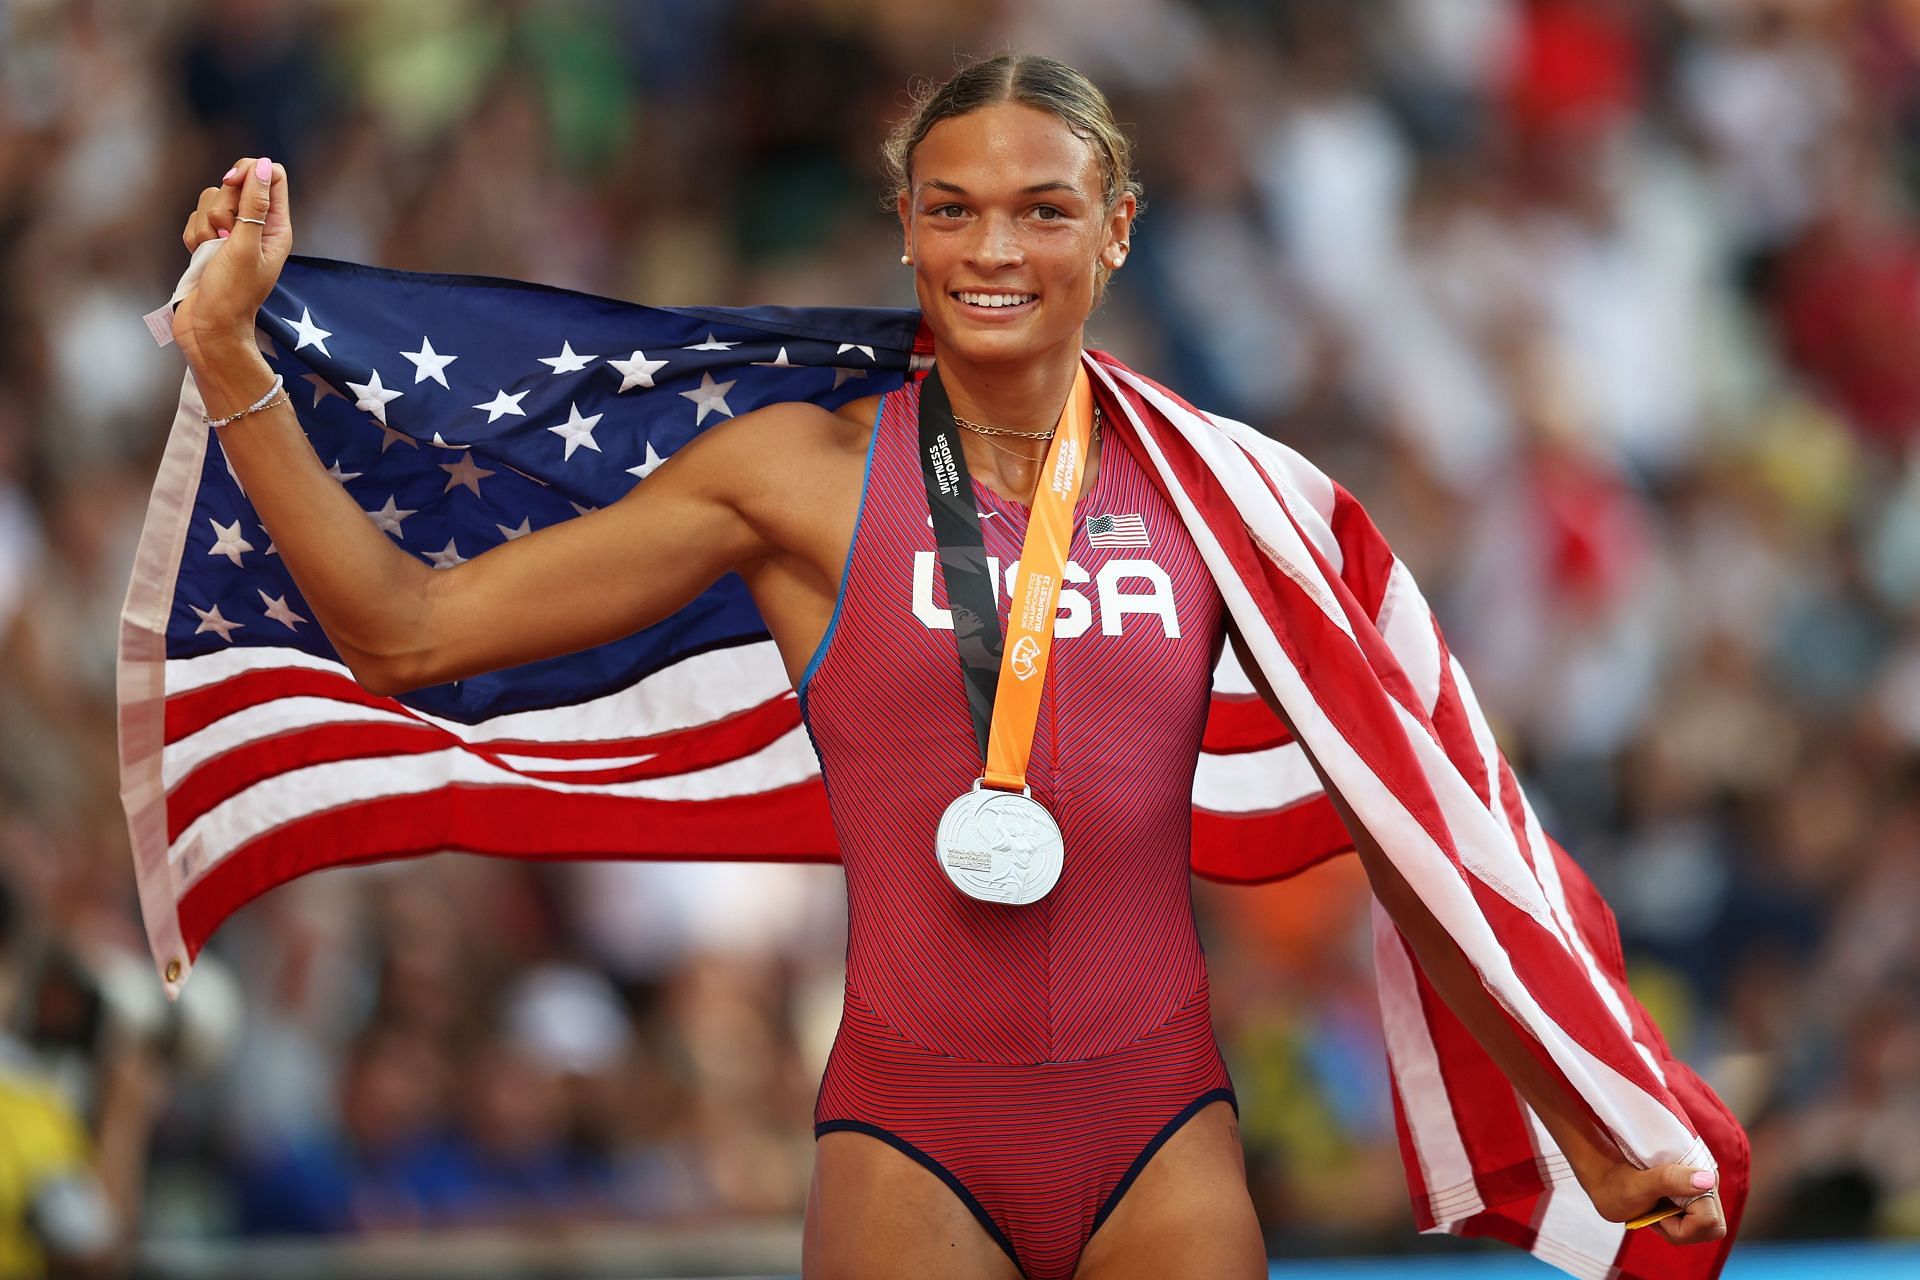 Anna Hall of Team United States celebrates with a United States flag after finishing second in the Women&#039;s 800m Heptathlon final during day two of the World Athletics Championships Budapest 2023 at National Athletics Centre on August 20, 2023, in Budapest, Hungary. (Photo by Michael Steele/Getty Images)